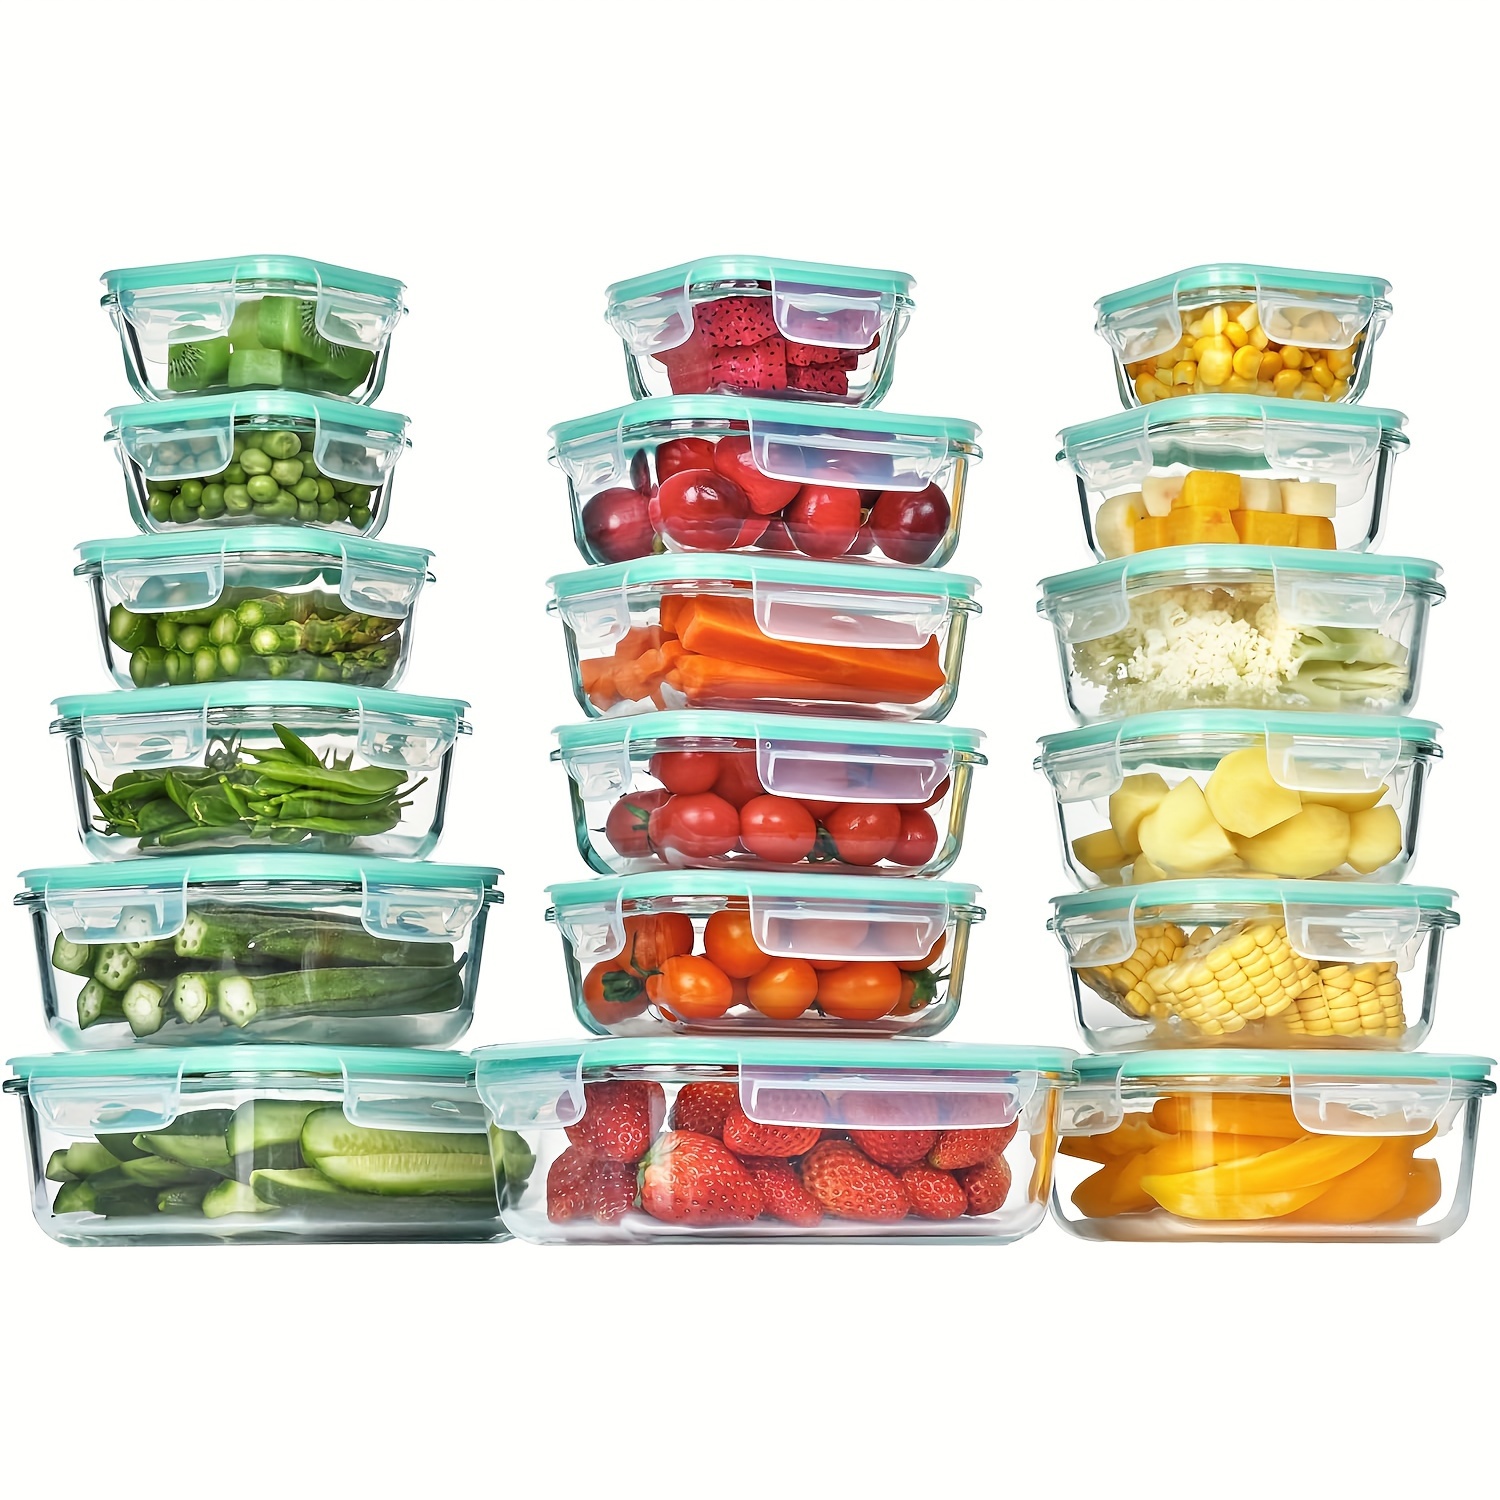 

18pack Glass Food Storage Containers With Lids, Meal Prep Containers, Airtight Lunch Containers Bento Boxes With Leak Proof Locking Lids For Microwave, Oven, Freezer, Dishwasher